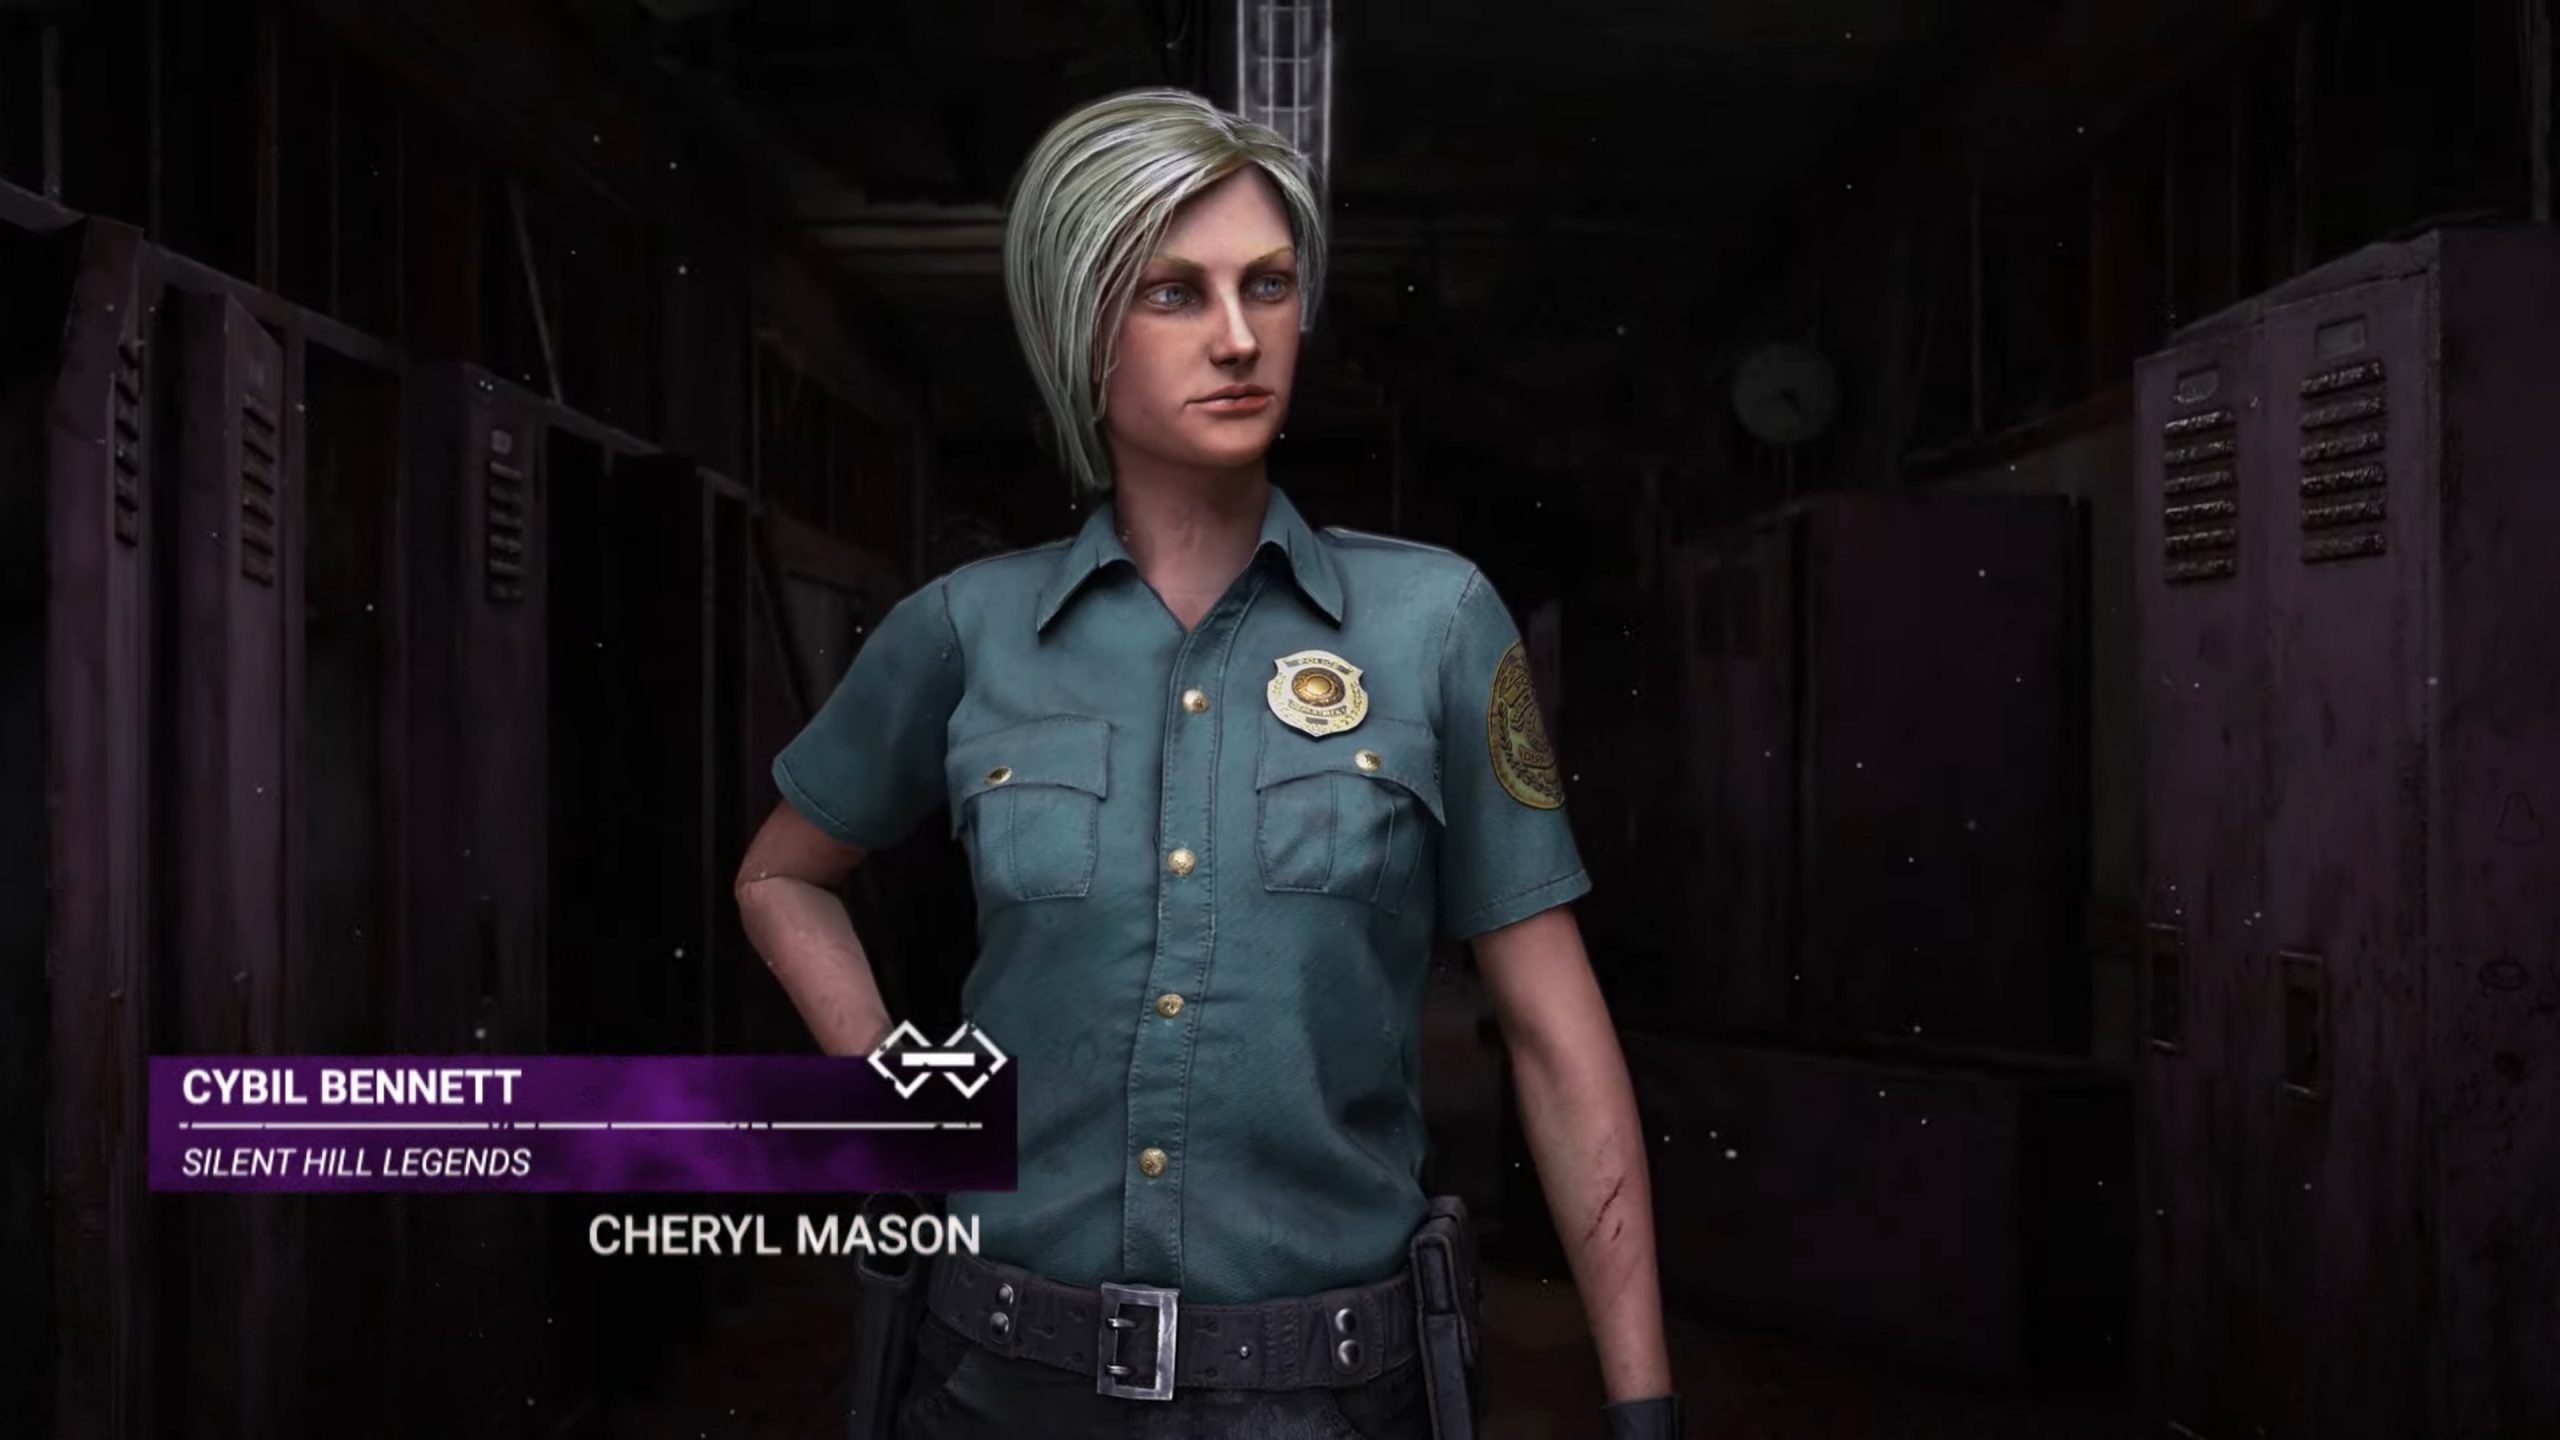 Dead by Daylight collaboration with Silent Hill now includes Cybil Bennett.